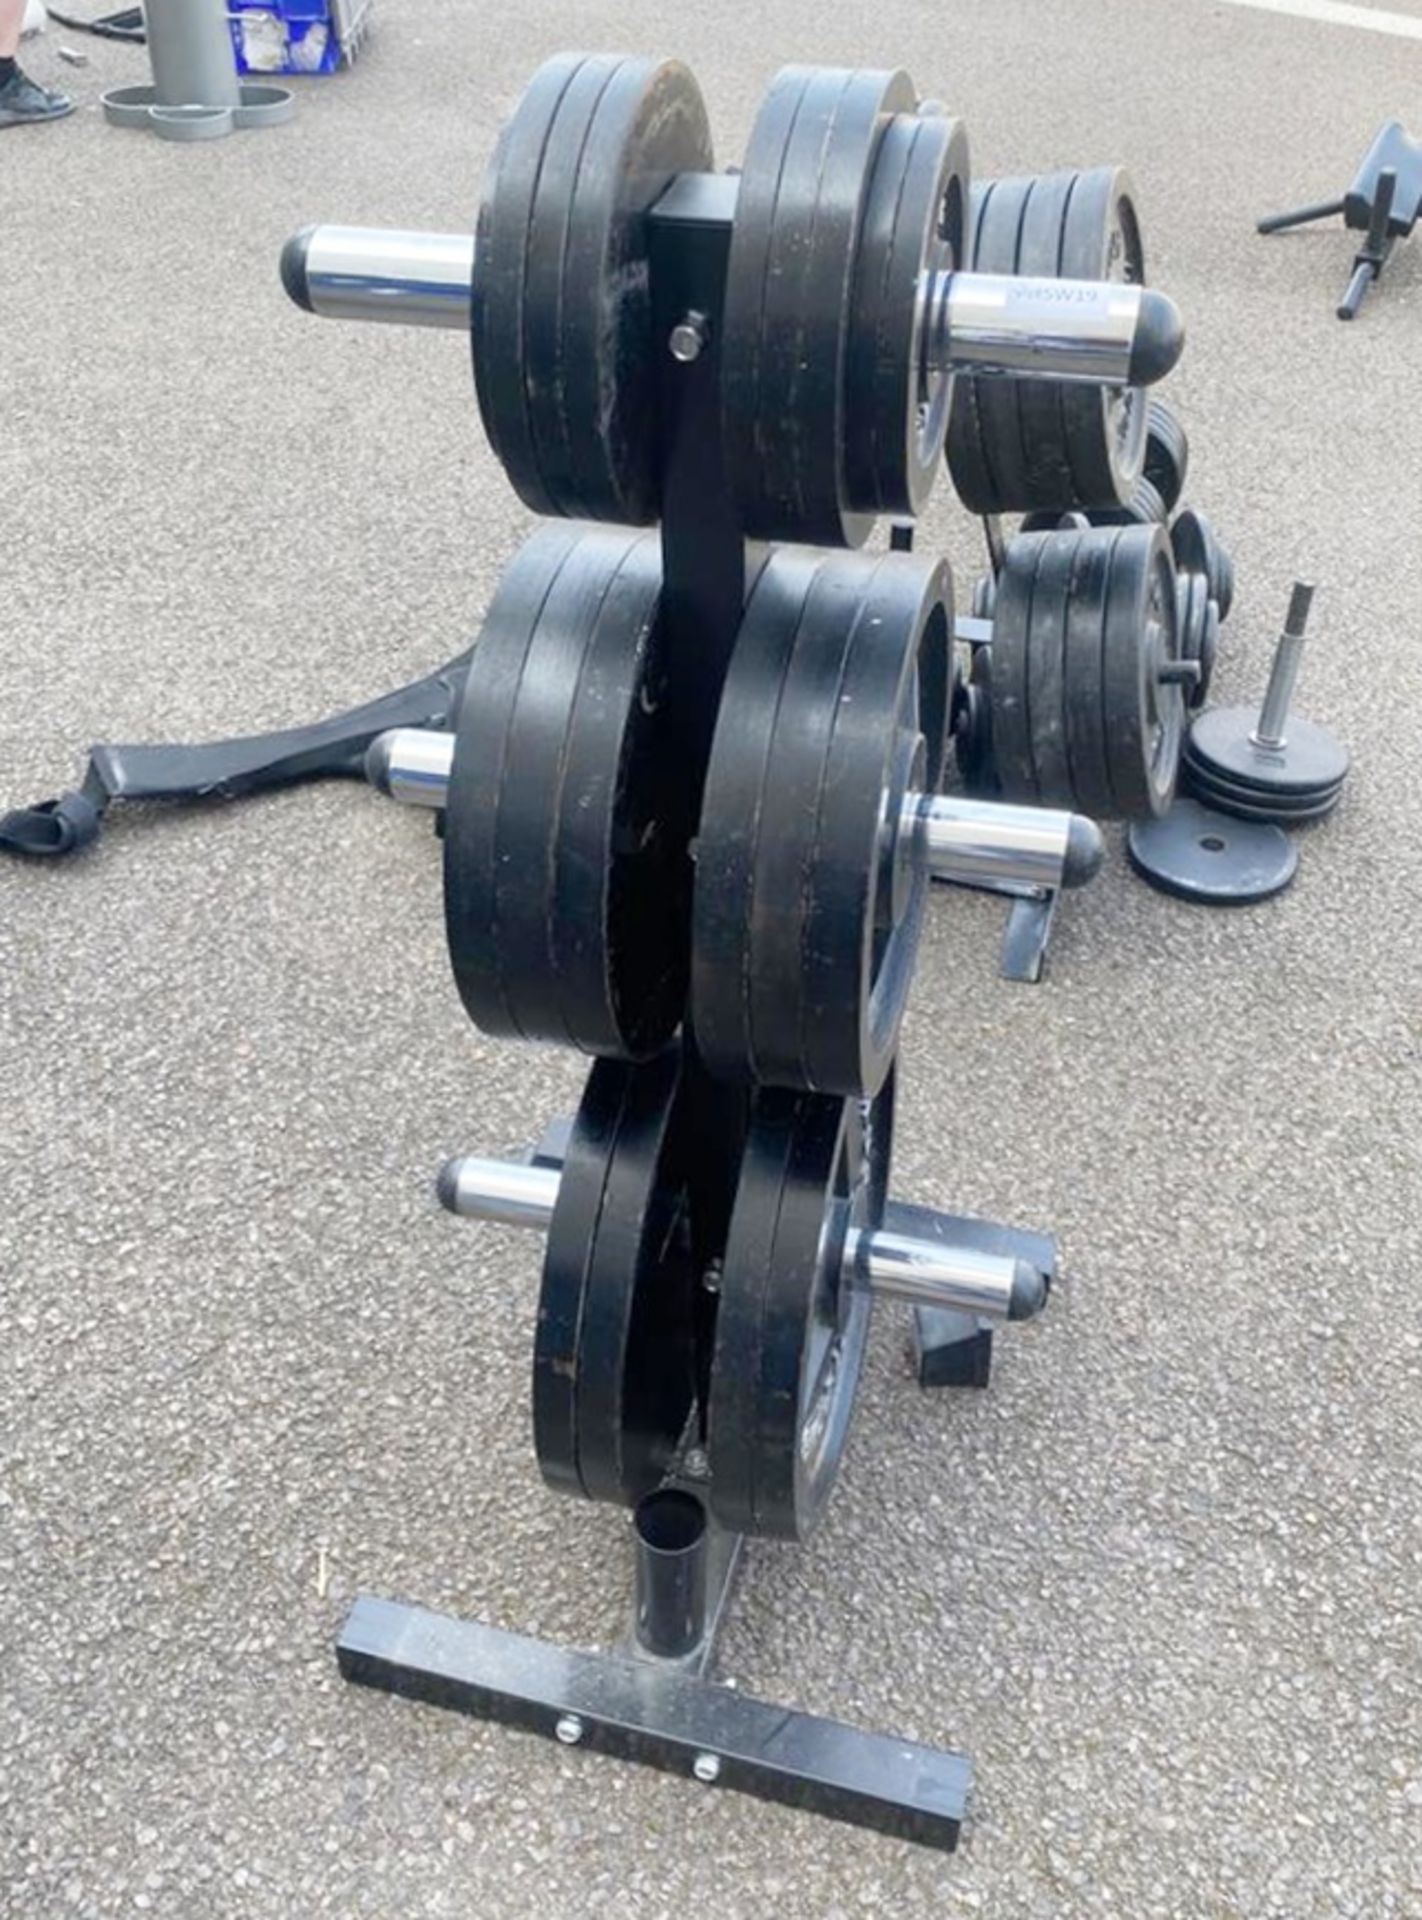 19 x Body Power Weight Discs With Stand - Includes 4x20kg, 6x15kg, 6x5kg and 3x2.5kg - Image 3 of 4